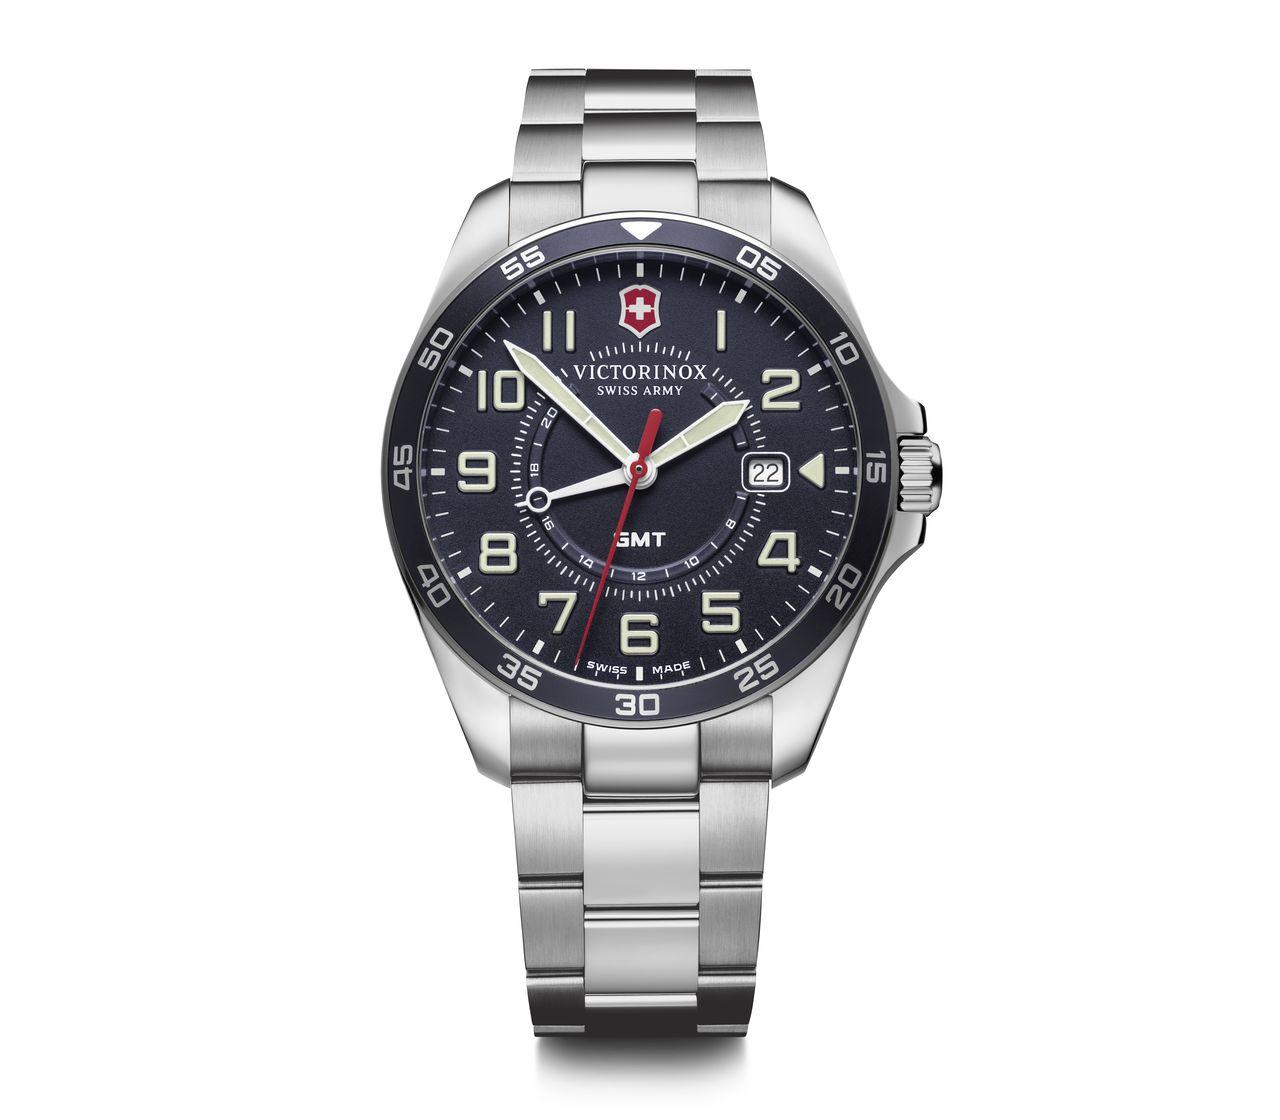 Victorinox FieldForce Classic GMT Watch with Black Dial and Silver  Stainless Steel Bracelet 並行輸入品 レディース腕時計